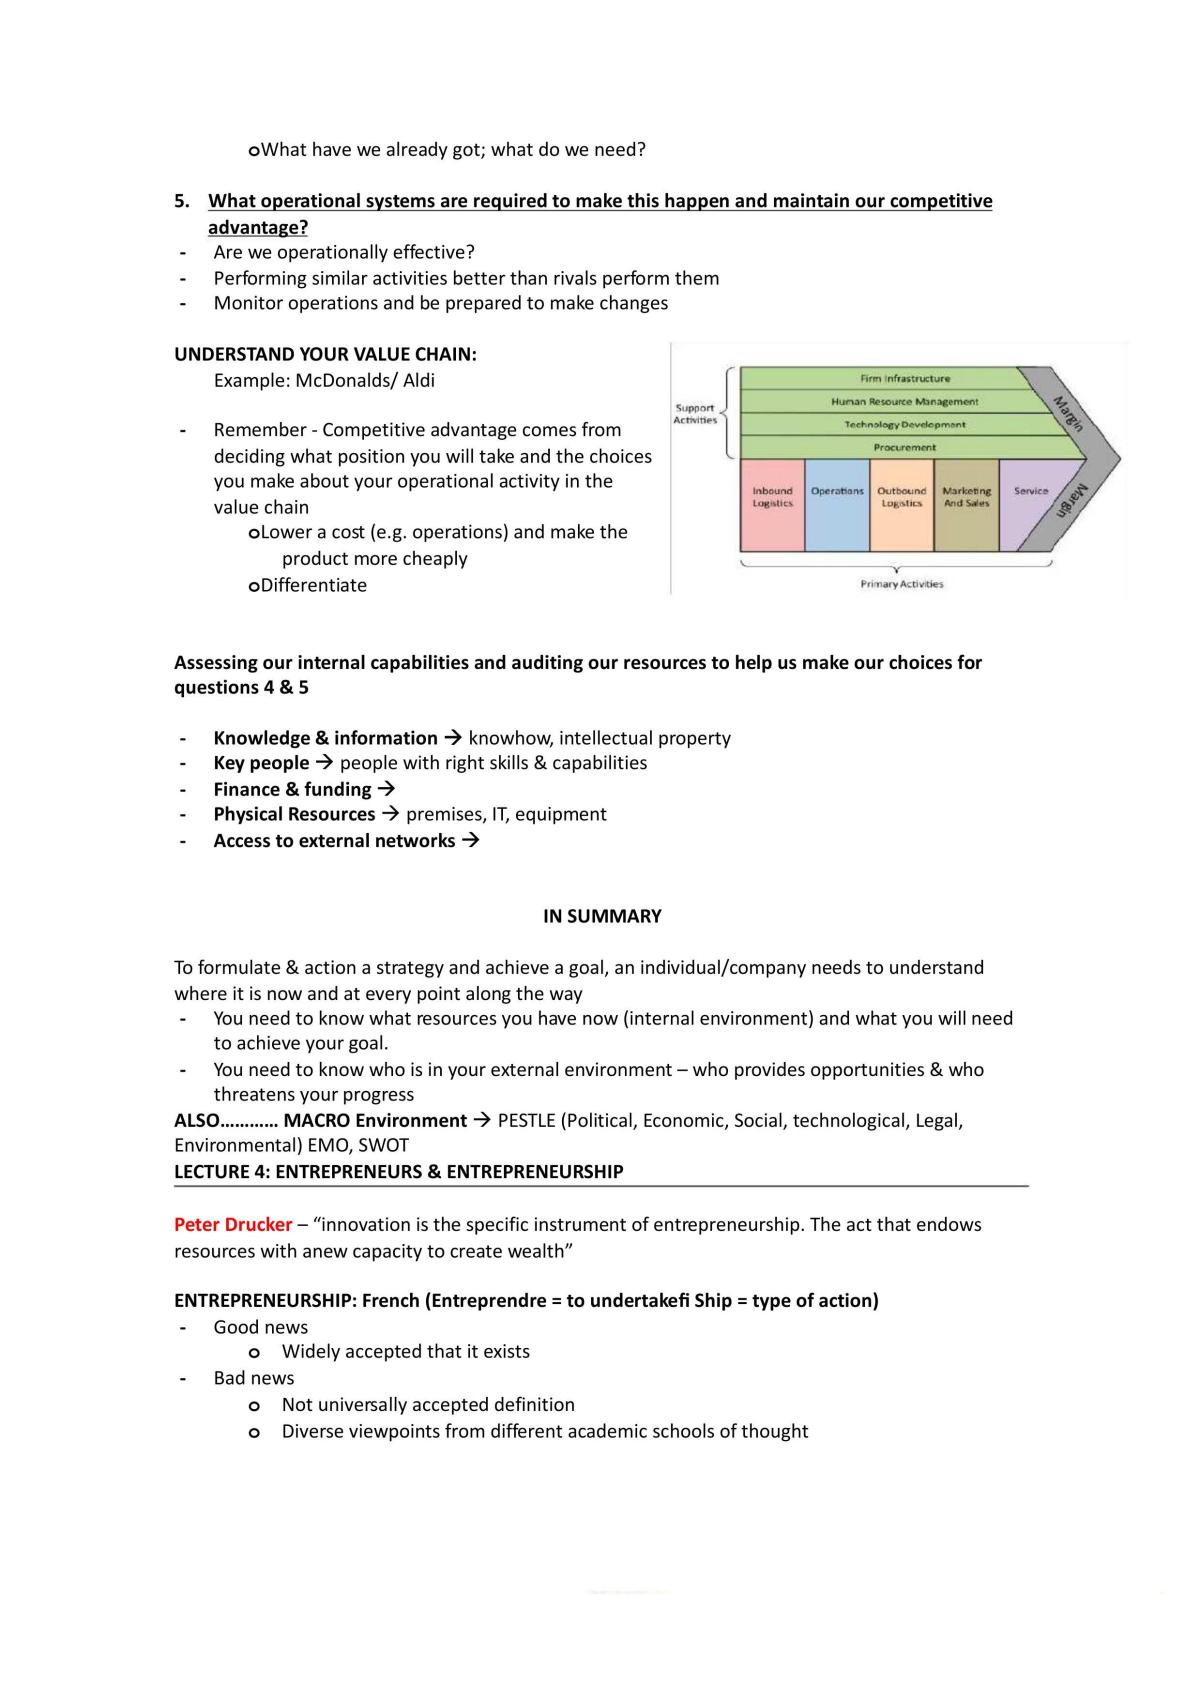 Entrepreneurship and Innovation Study Guide - Page 17